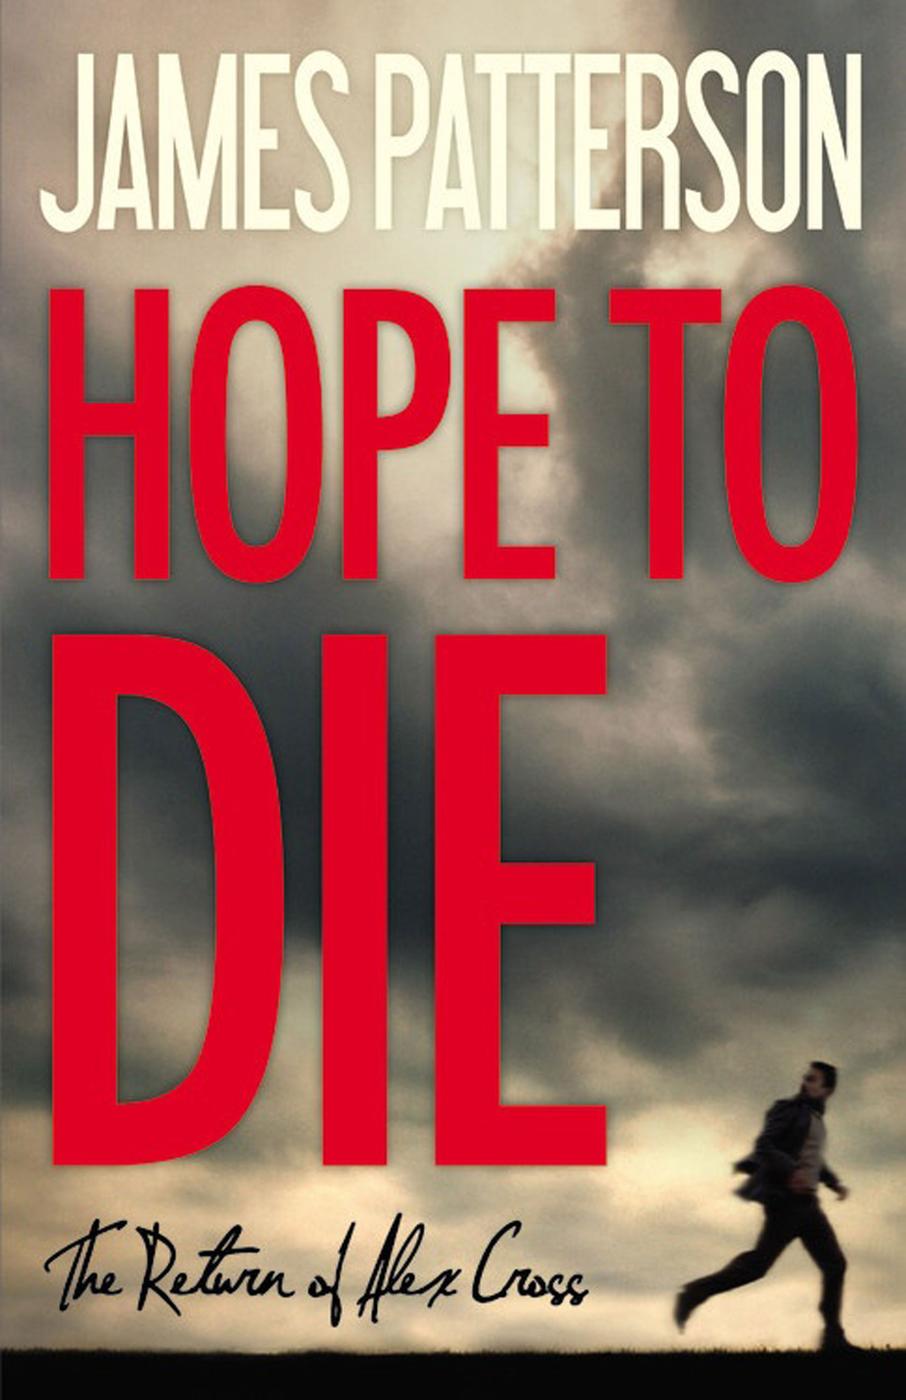 Friday Reads: Hope to Die by James Patterson